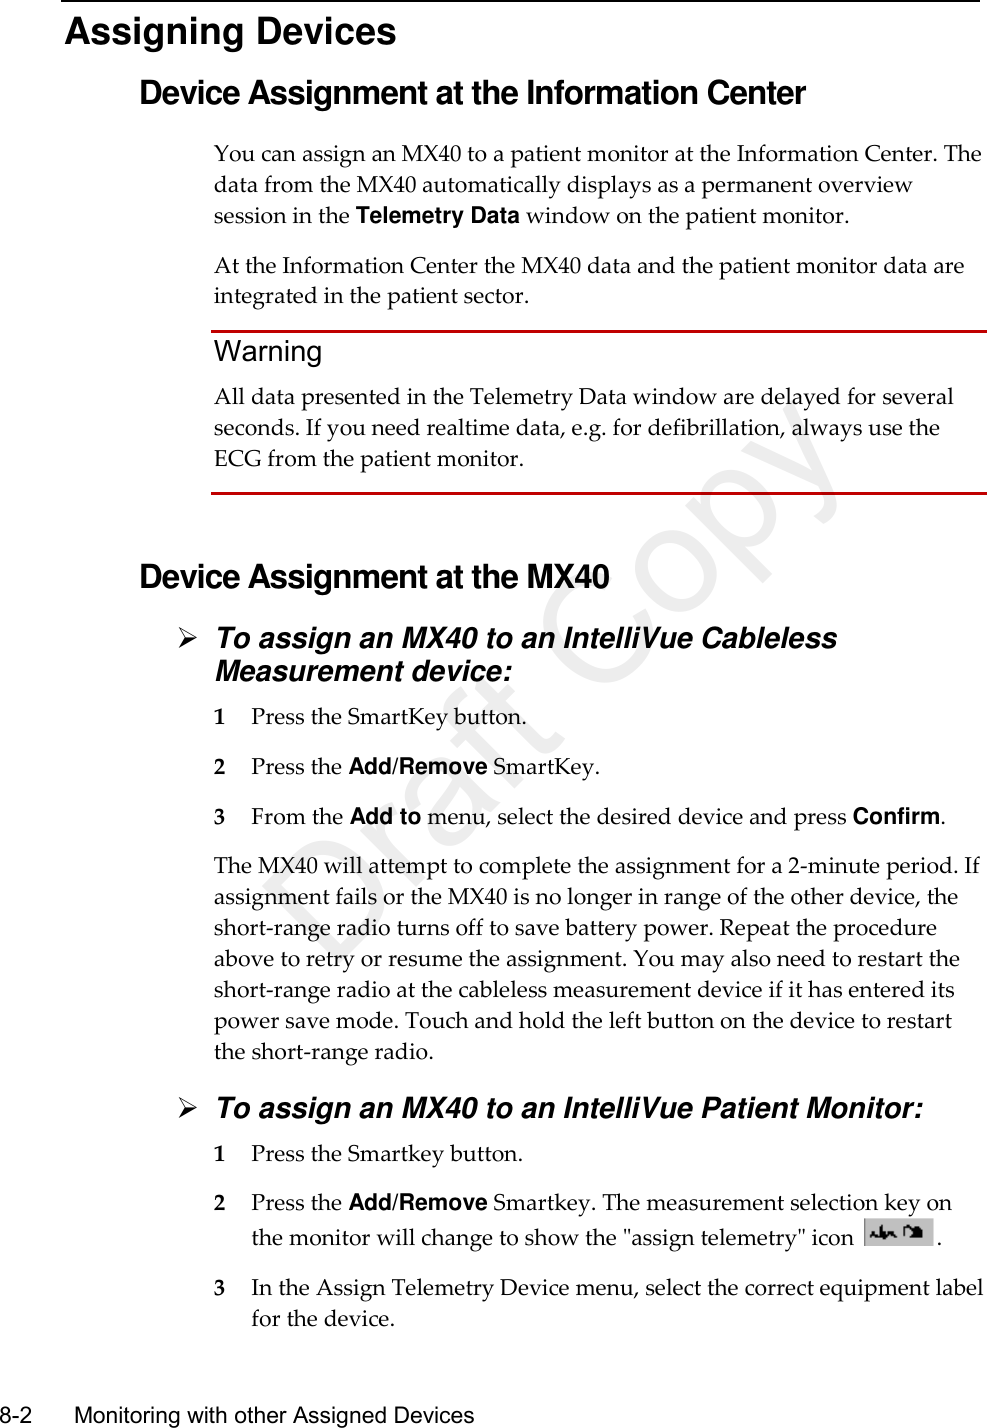    8-2    Monitoring with other Assigned Devices   Assigning Devices Device Assignment at the Information Center You can assign an MX40 to a patient monitor at the Information Center. The data from the MX40 automatically displays as a permanent overview session in the Telemetry Data window on the patient monitor.   At the Information Center the MX40 data and the patient monitor data are integrated in the patient sector.   Warning All data presented in the Telemetry Data window are delayed for several seconds. If you need realtime data, e.g. for defibrillation, always use the ECG from the patient monitor.   Device Assignment at the MX40  To assign an MX40 to an IntelliVue Cableless Measurement device: 1 Press the SmartKey button. 2 Press the Add/Remove SmartKey. 3 From the Add to menu, select the desired device and press Confirm. The MX40 will attempt to complete the assignment for a 2-minute period. If assignment fails or the MX40 is no longer in range of the other device, the short-range radio turns off to save battery power. Repeat the procedure above to retry or resume the assignment. You may also need to restart the short-range radio at the cableless measurement device if it has entered its power save mode. Touch and hold the left button on the device to restart the short-range radio.  To assign an MX40 to an IntelliVue Patient Monitor: 1 Press the Smartkey button. 2 Press the Add/Remove Smartkey. The measurement selection key on the monitor will change to show the &quot;assign telemetry&quot; icon  . 3 In the Assign Telemetry Device menu, select the correct equipment label for the device. Draft Copy